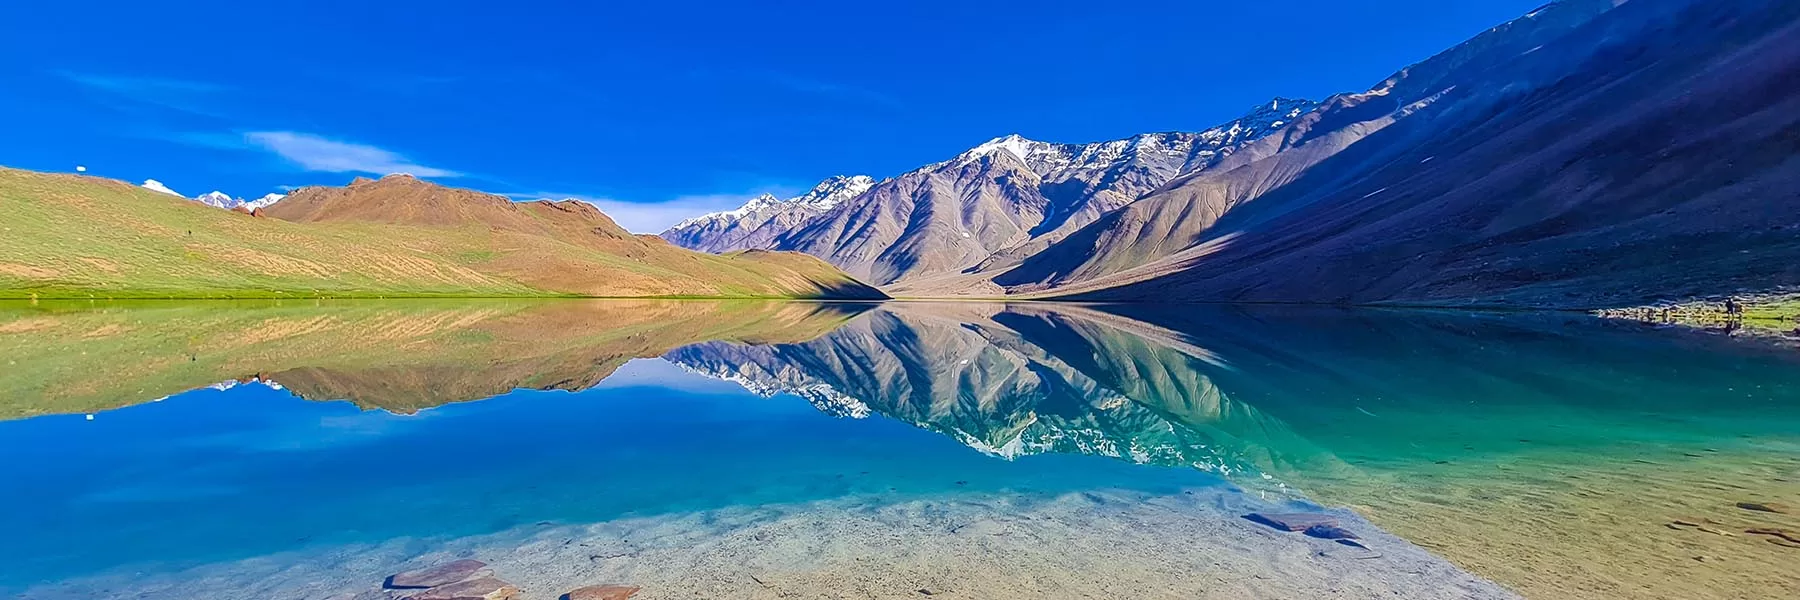 What to see in India’s Spiti Valley